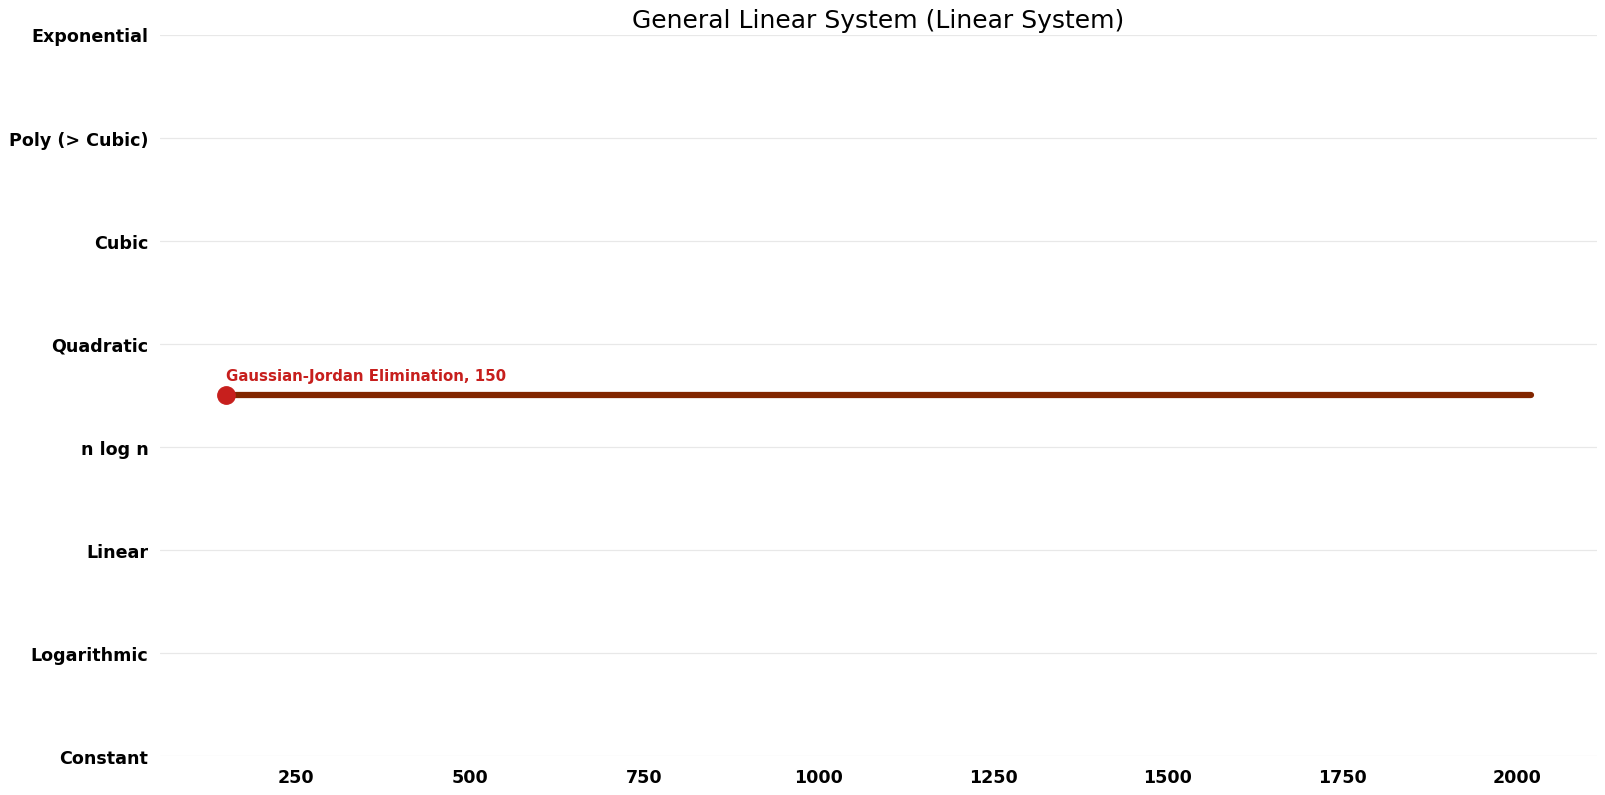 Linear System - General Linear System - Time.png